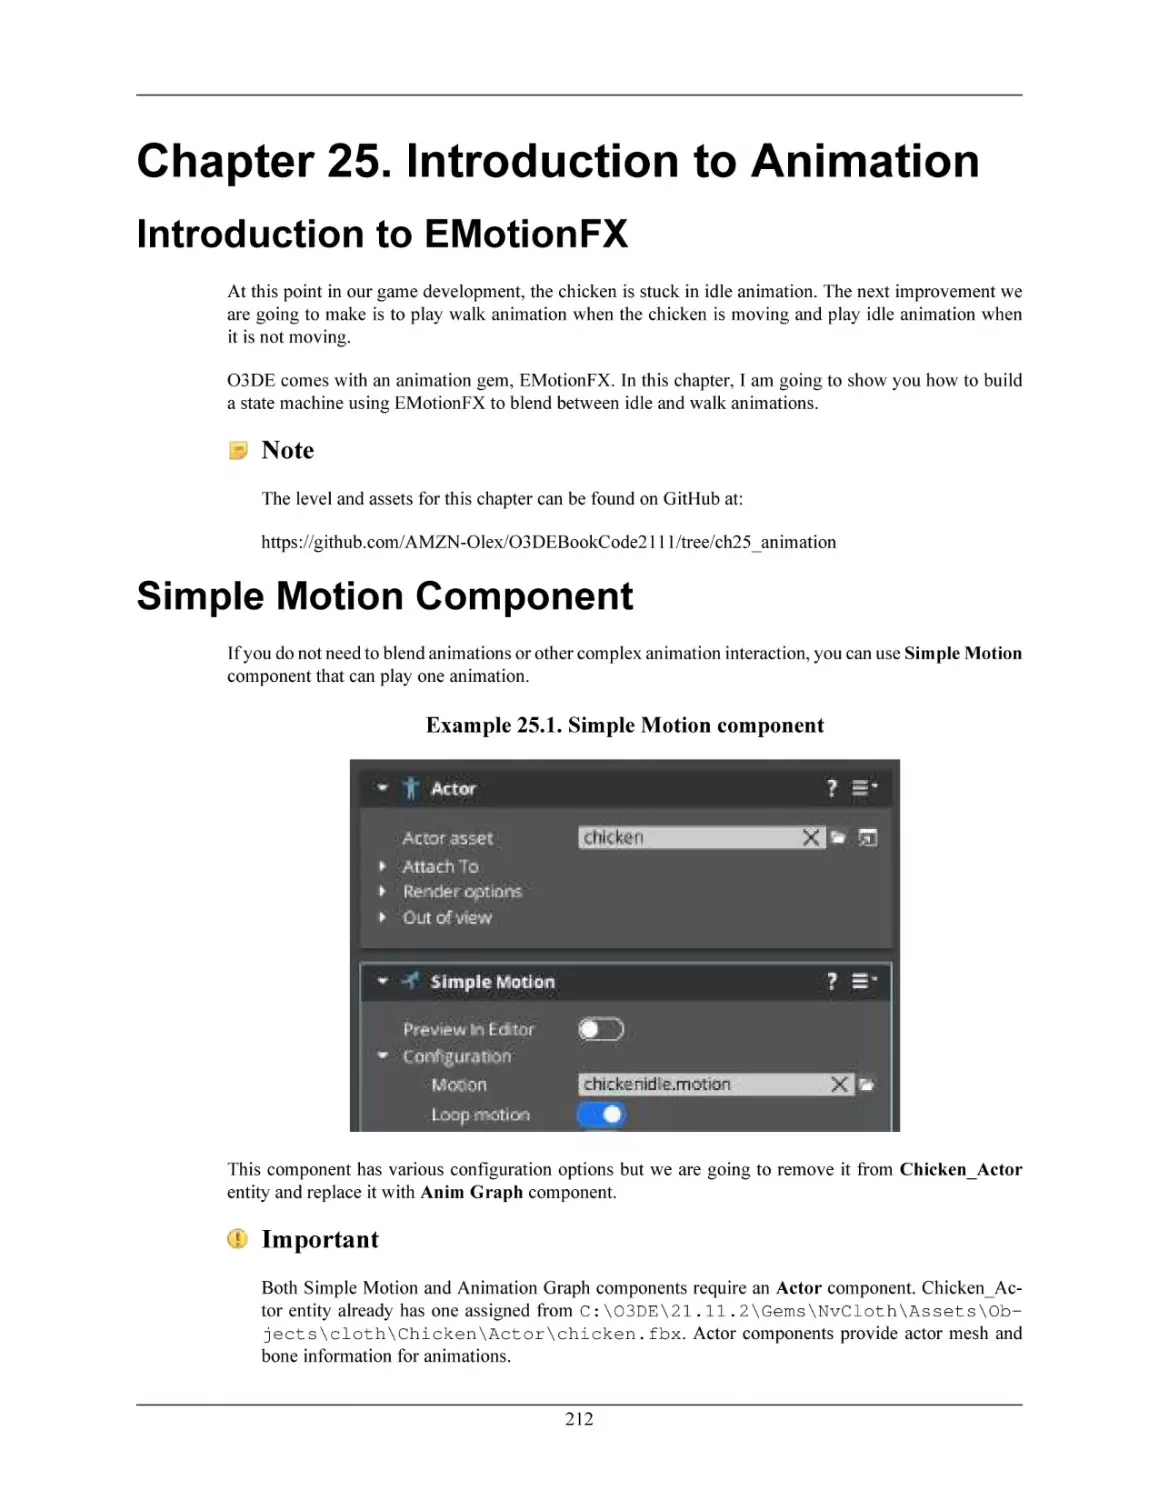 Chapter 25. Introduction to Animation
Introduction to EMotionFX
Simple Motion Component